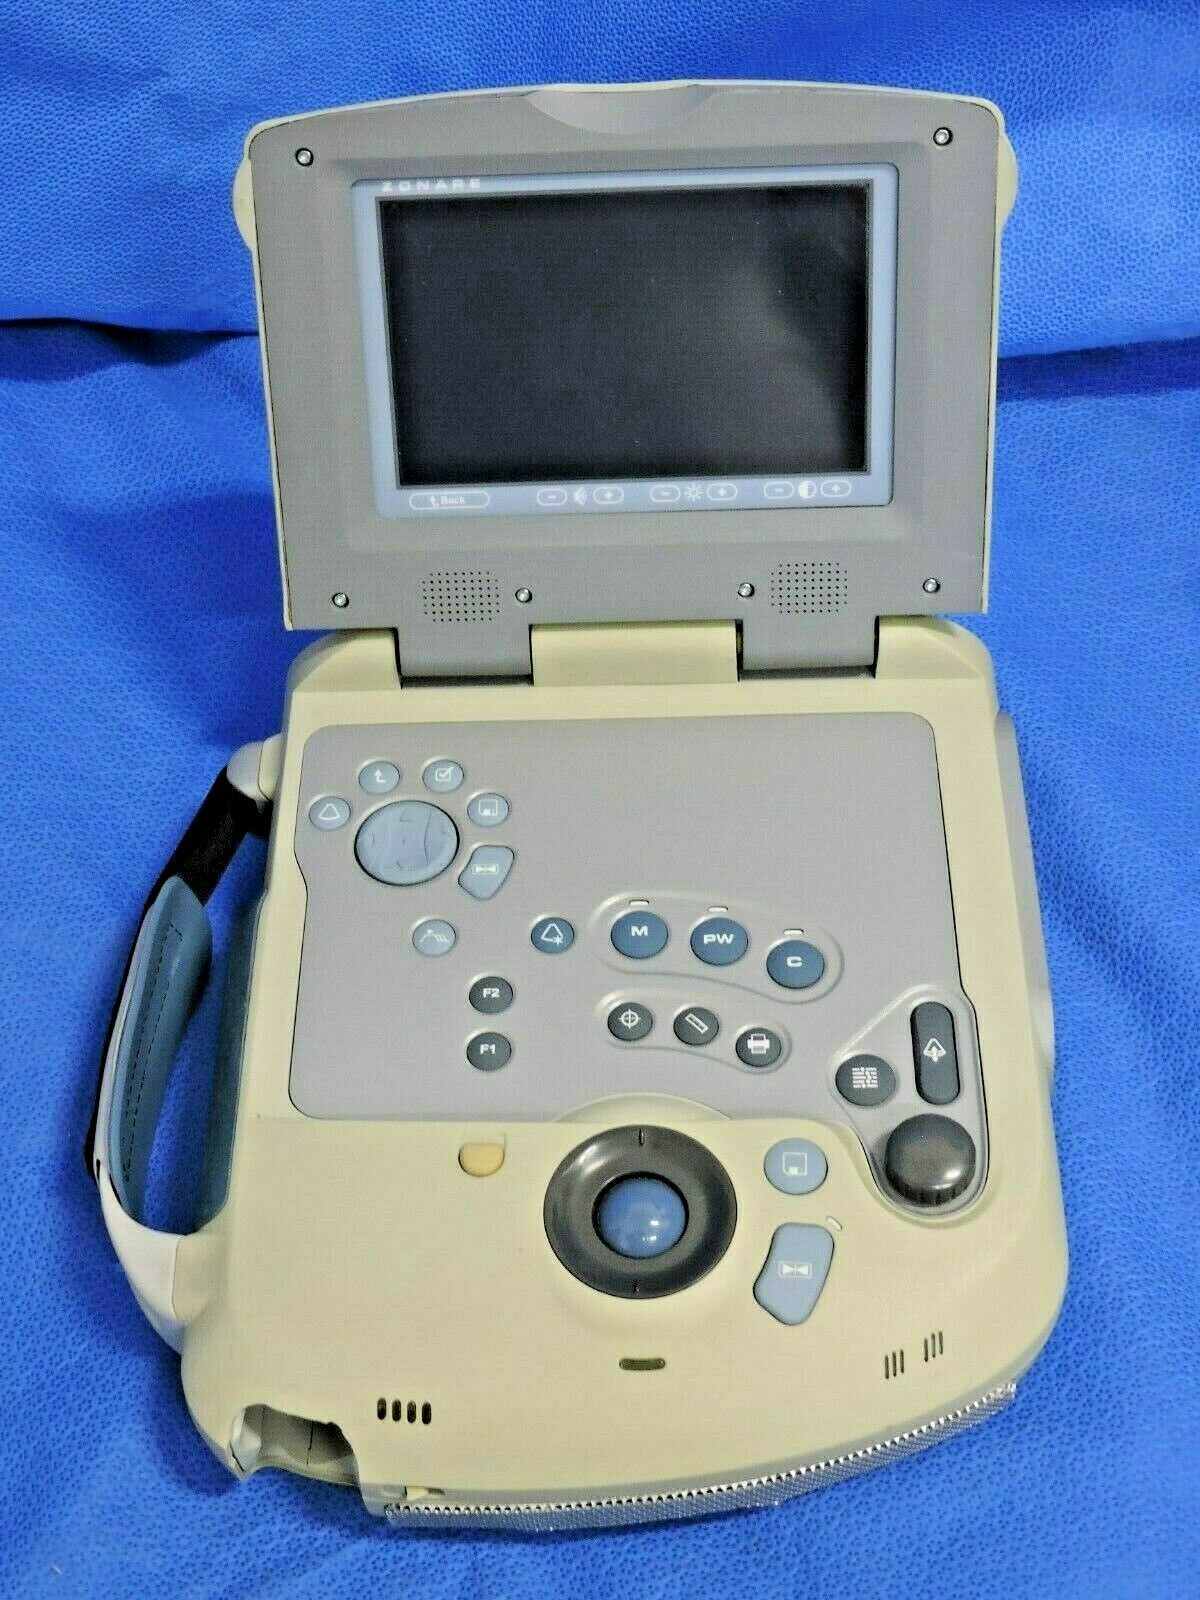 ZONARE Z. One Scan Engine Ultrasound Machine Portable Handheld System No Battery DIAGNOSTIC ULTRASOUND MACHINES FOR SALE